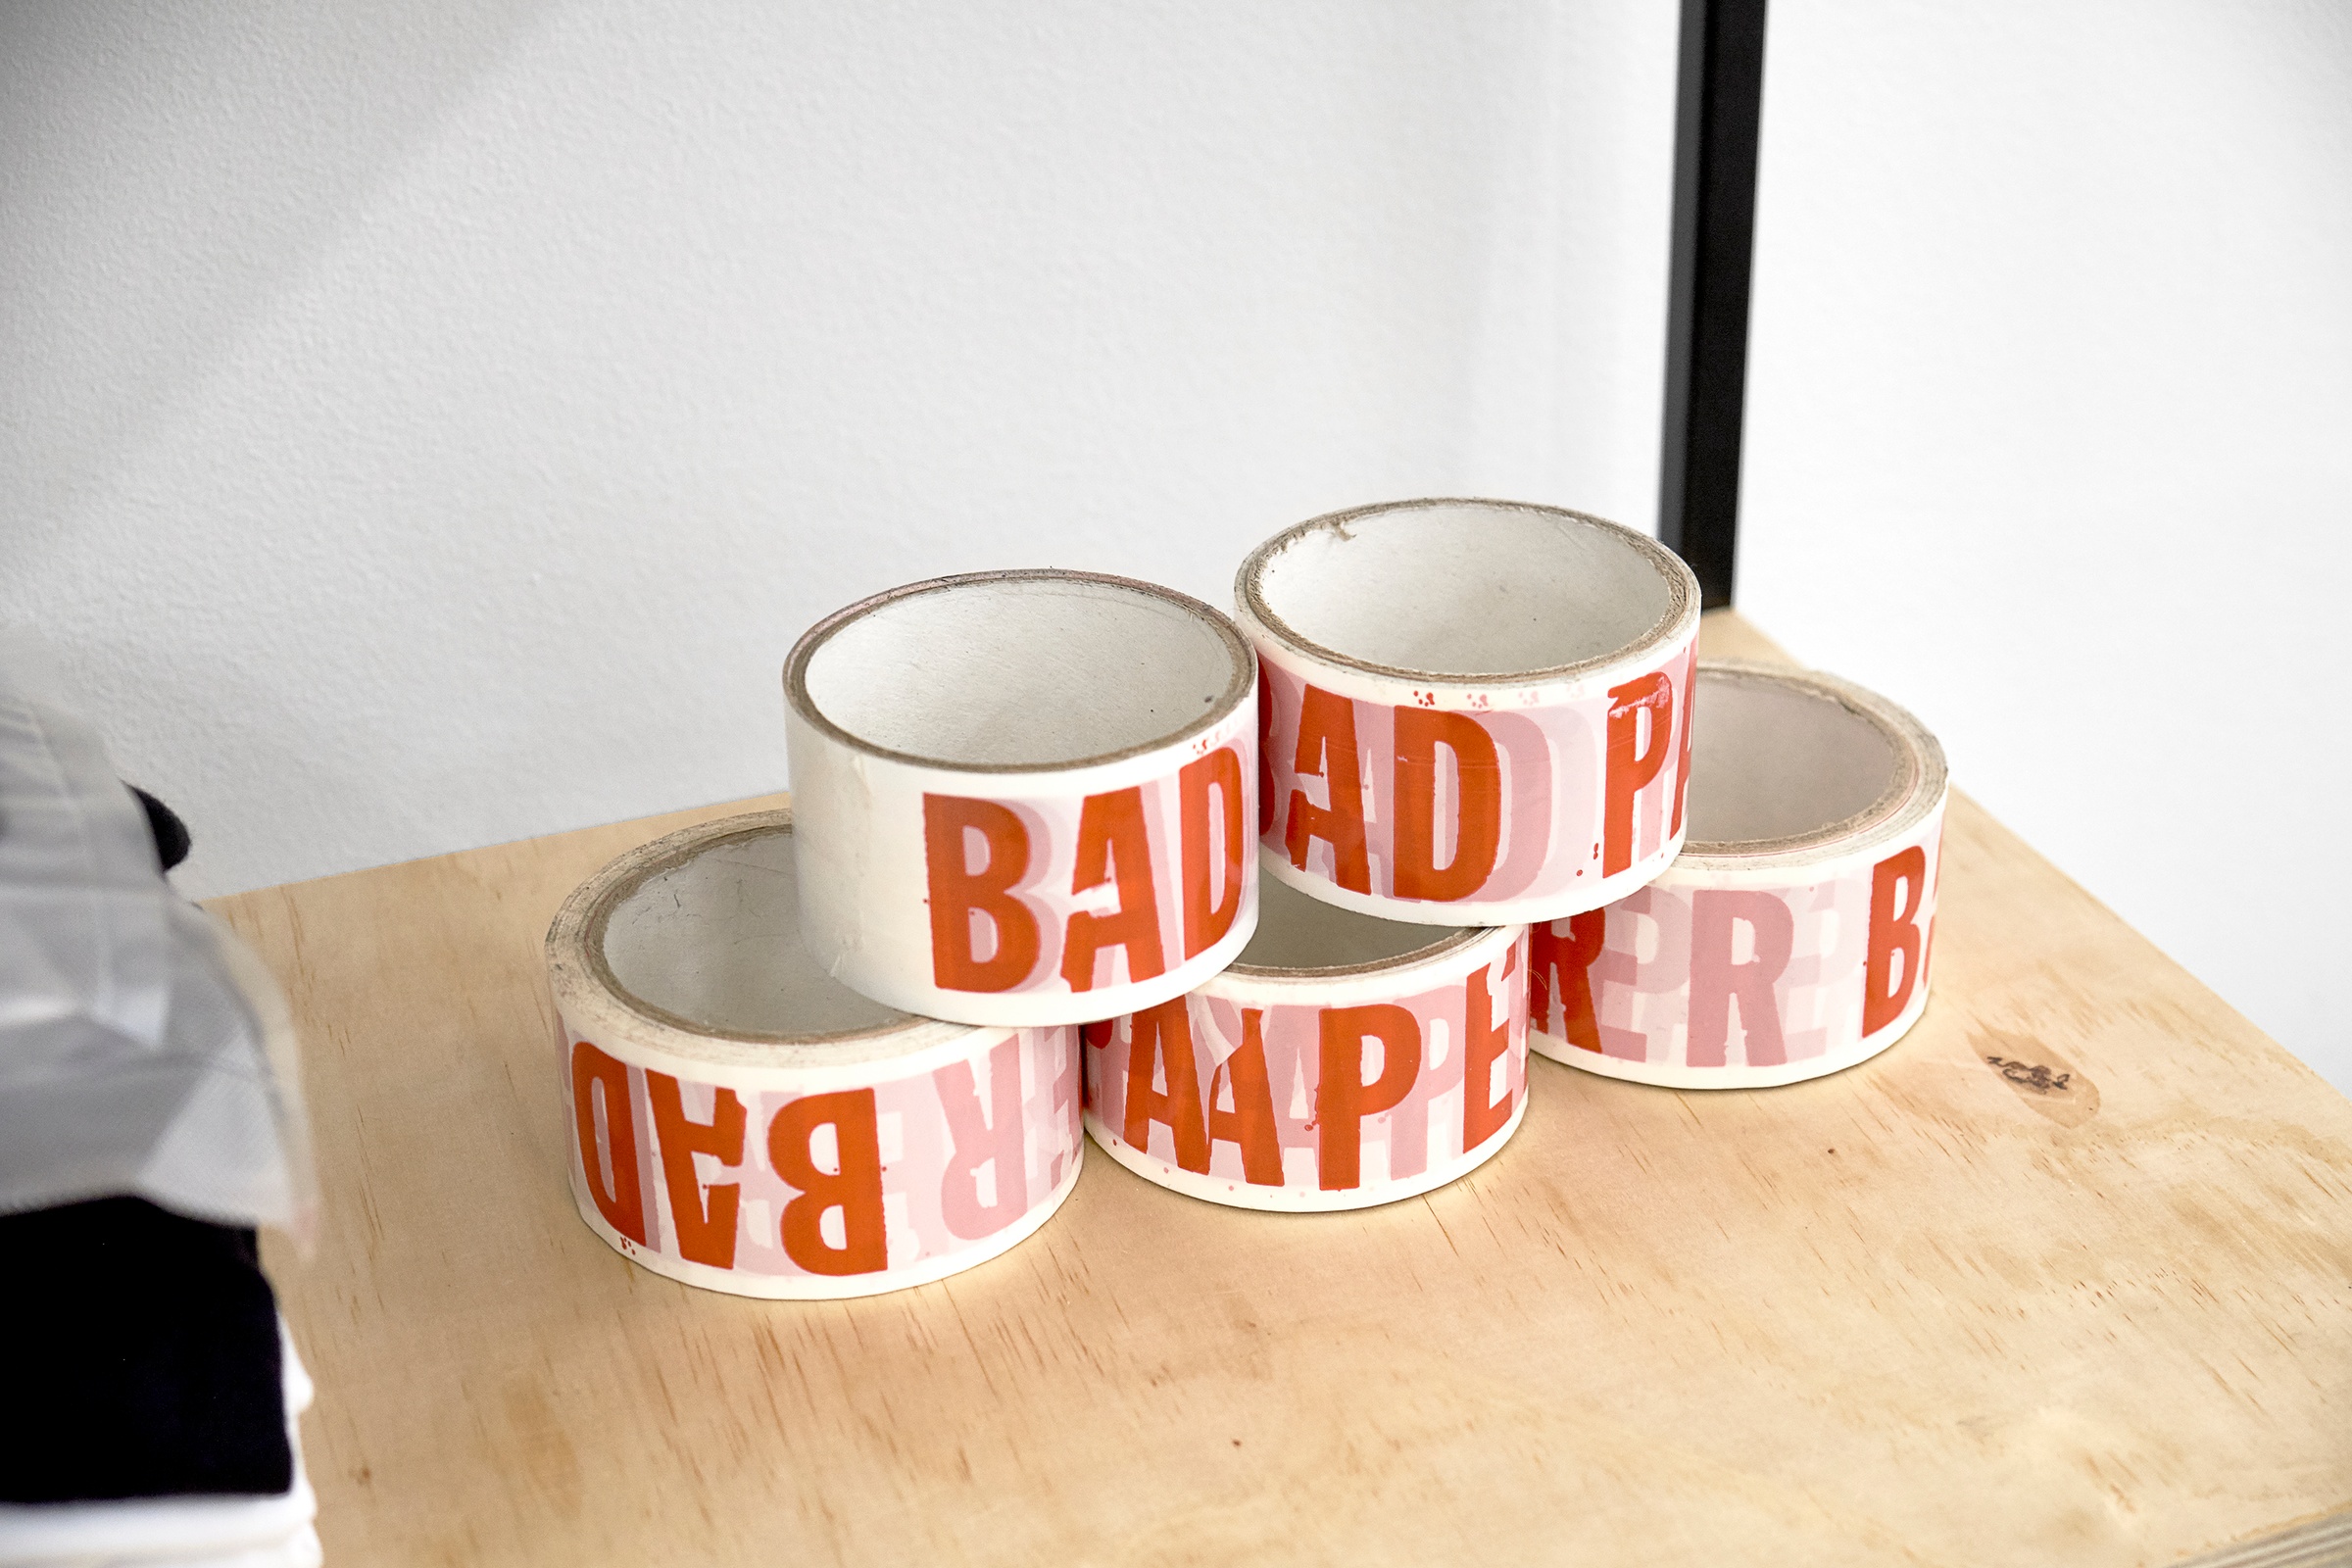 Installation photograph from the Bad Paper residency on A4’s top floor shows rolls of tape on a wooden shelf. Th semi-transparent white tape repeats the phrase ‘BAD PAPER’ in bold red font.
